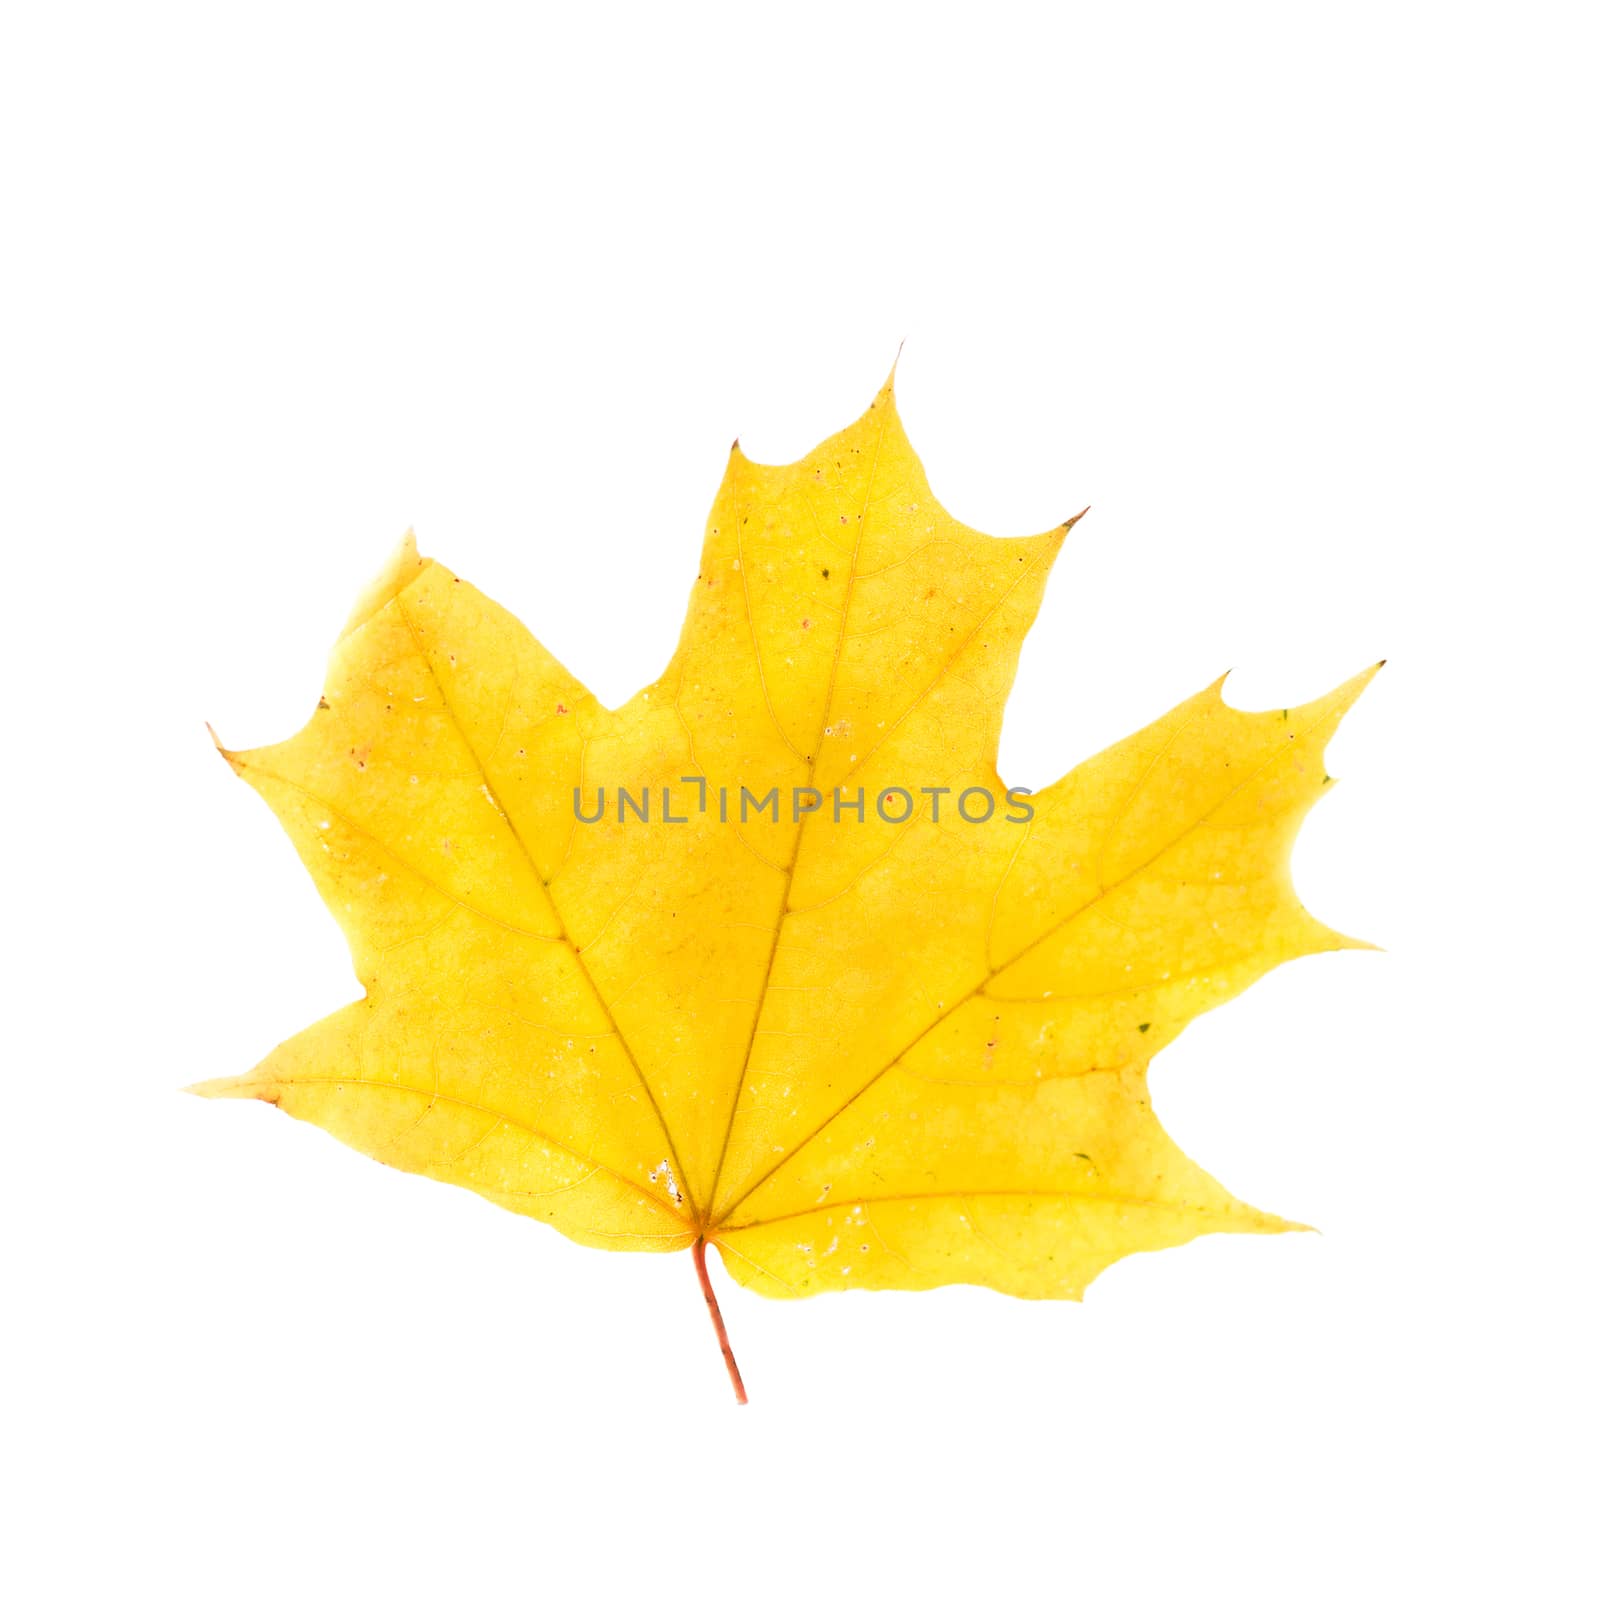 Yellow maple leaf isolated on white background. Golden maple leaf as an autumn symbol